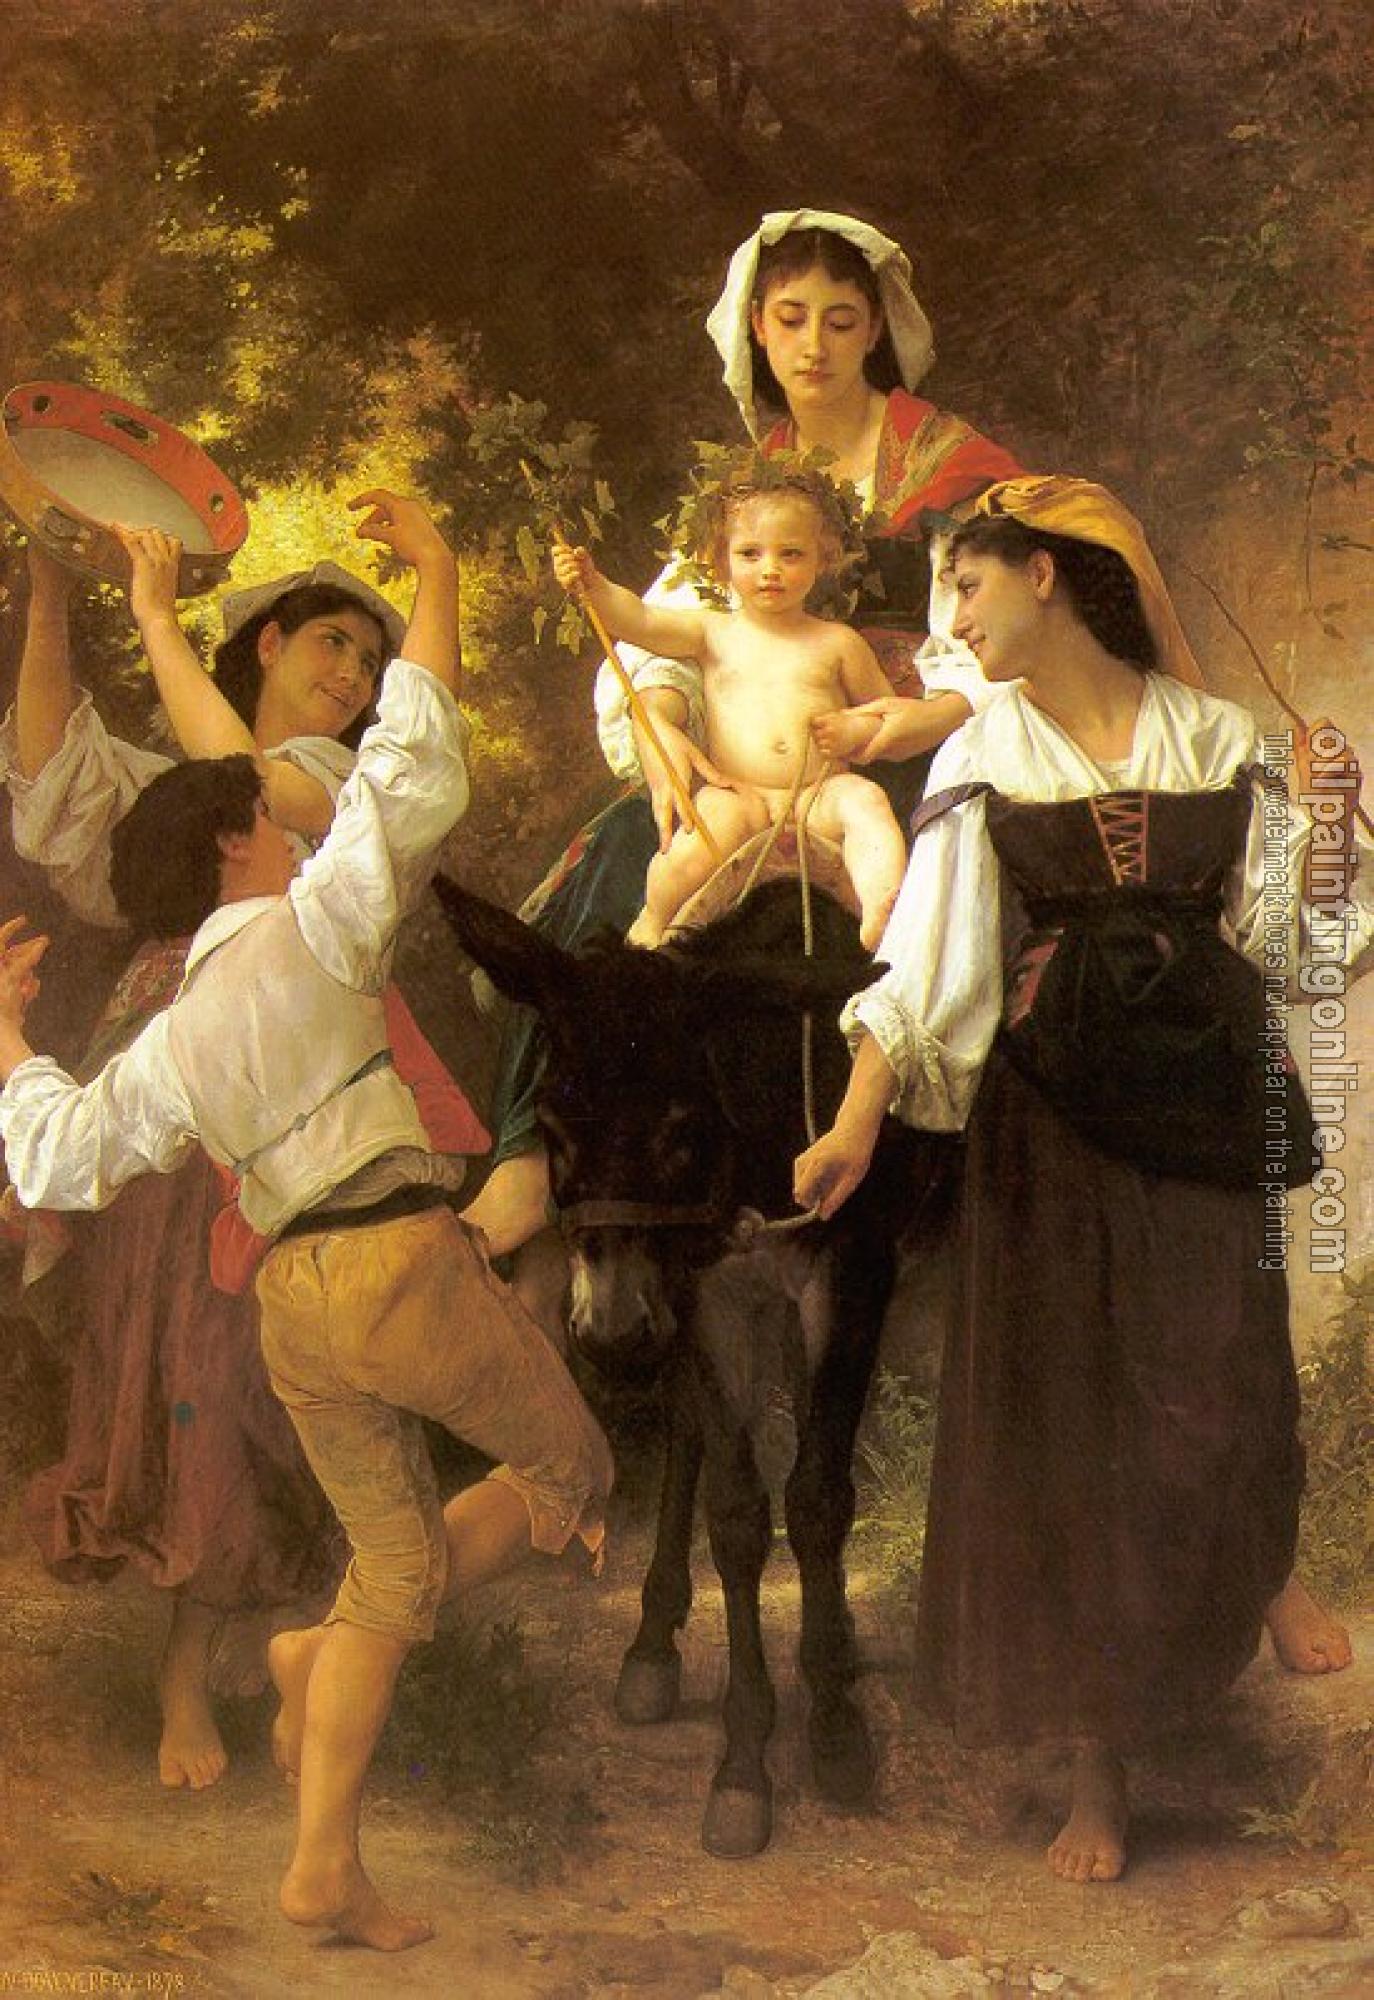 Bouguereau, William-Adolphe - Return from the Harvest